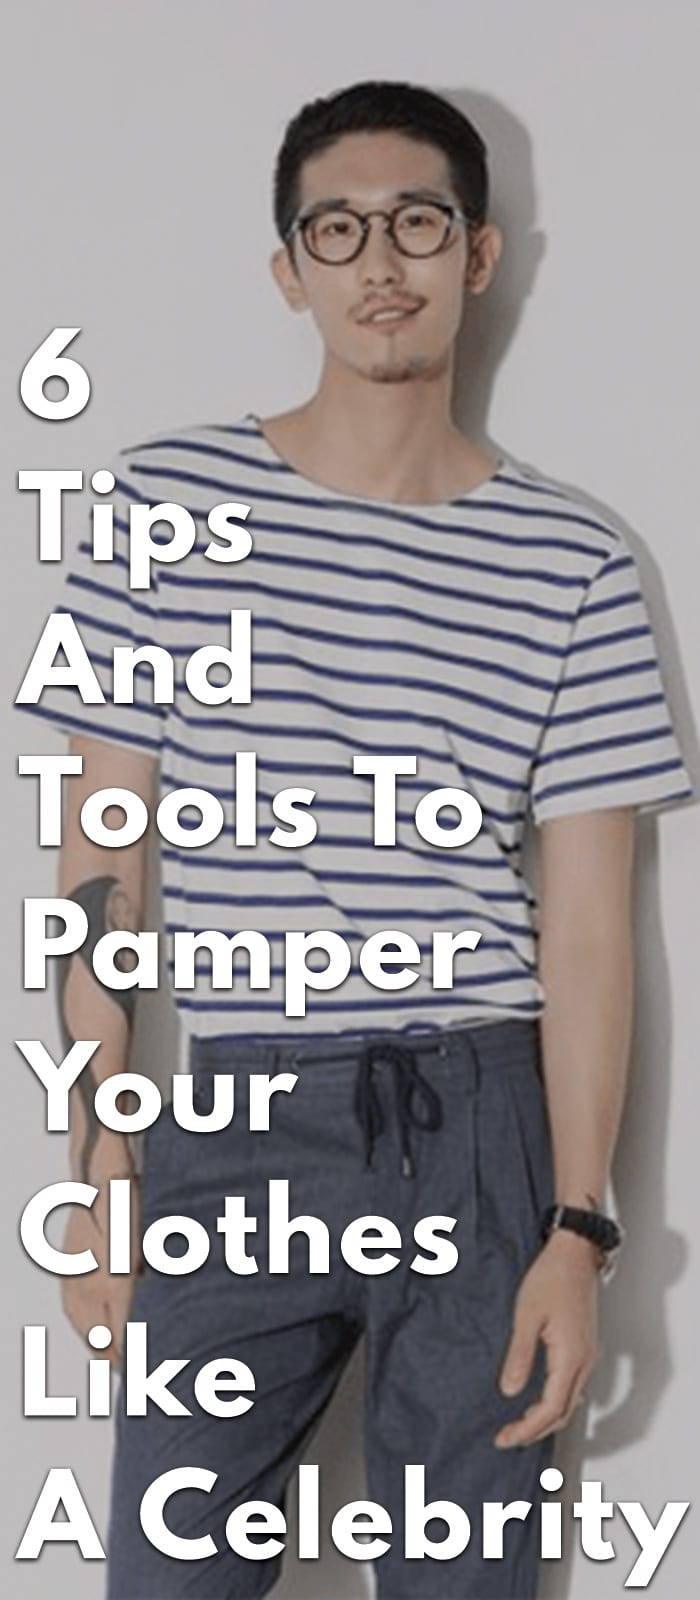 6-Tips-and-Tools-to-Pamper-Your-Clothes-Like-A-Celebrity